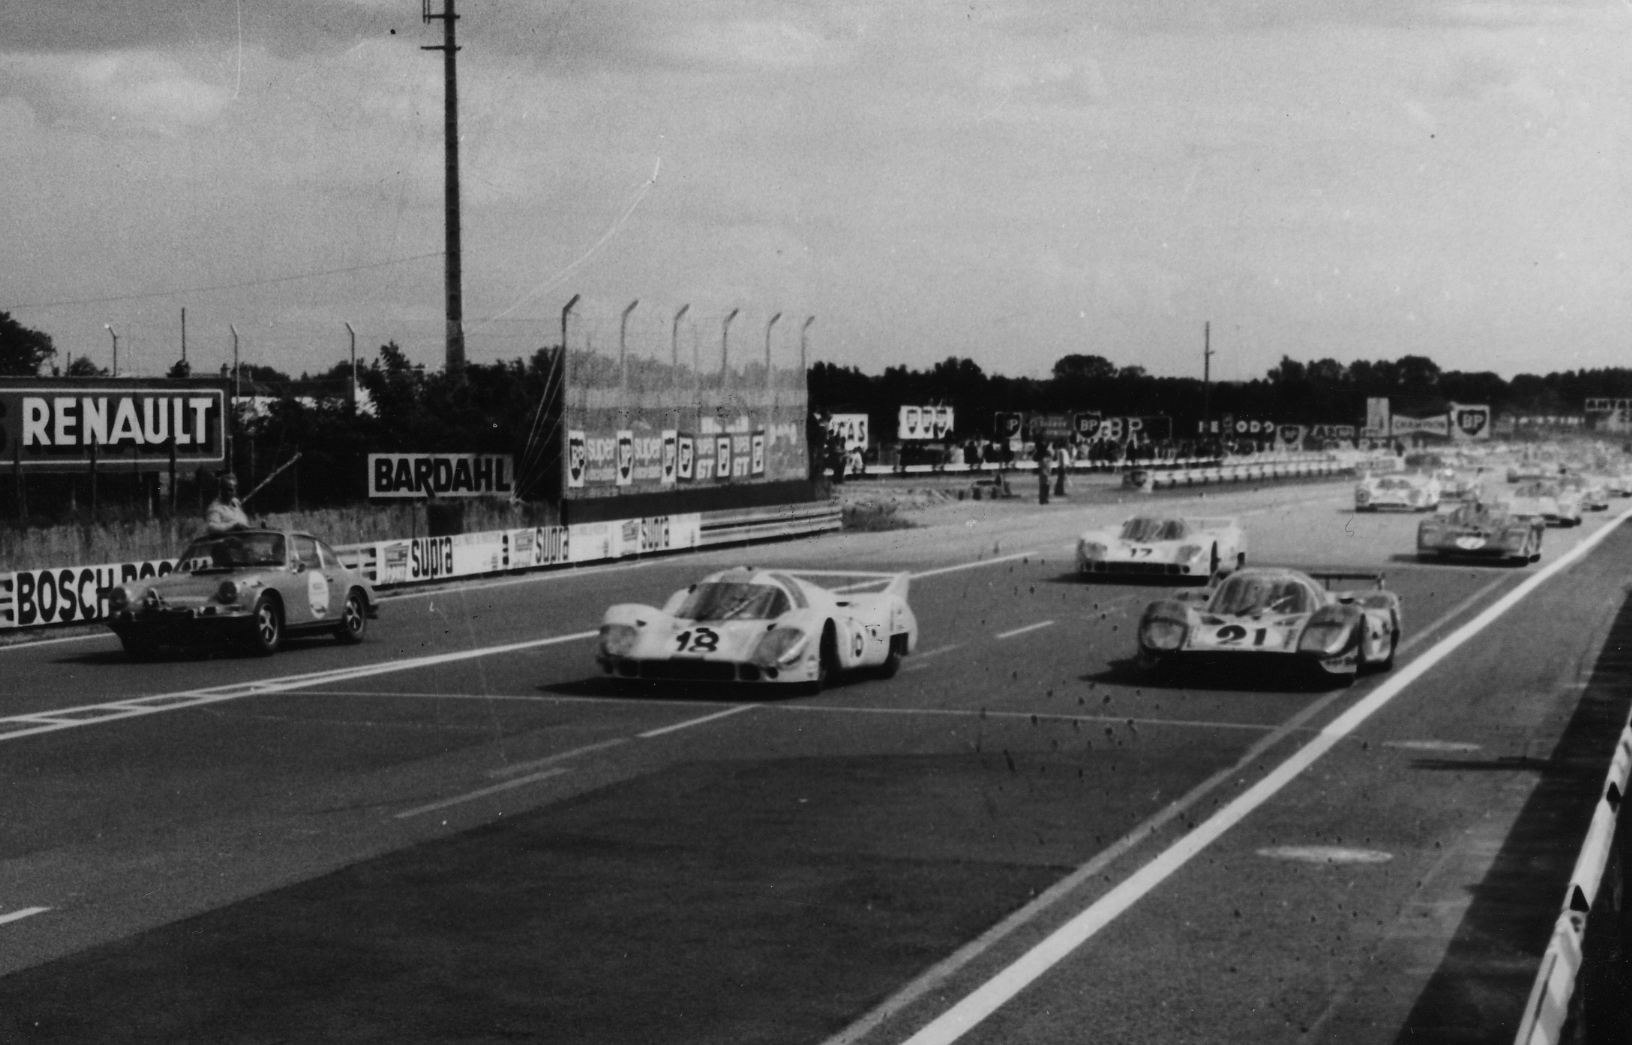 It was this car that started from pole. In fact, as you can see from the photo, three 917 LHs occupied the first three places on the grid.